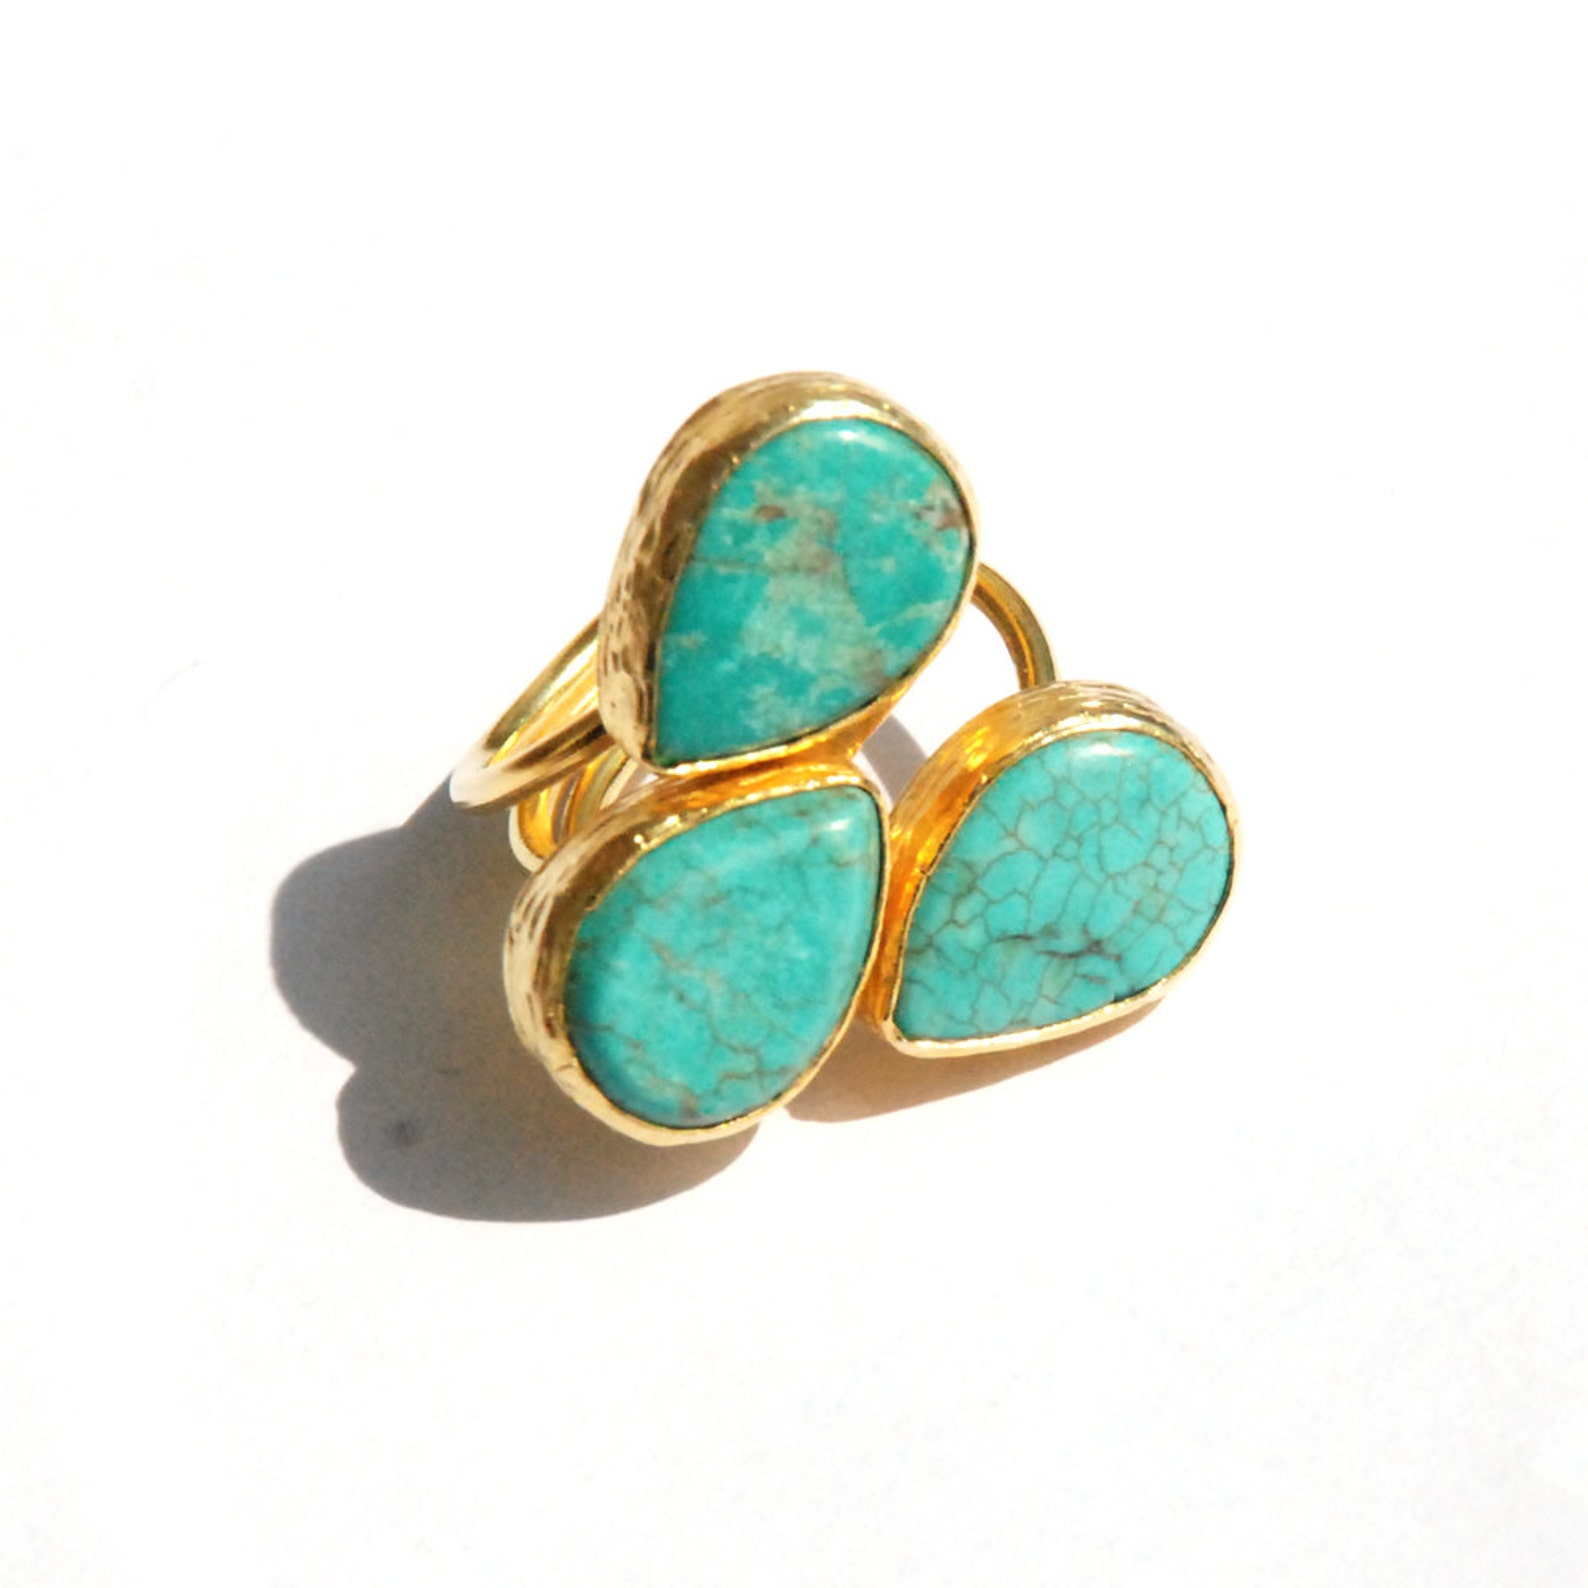 Turquoise Ring With Three Teardrop Stones Gold Statement - Etsy